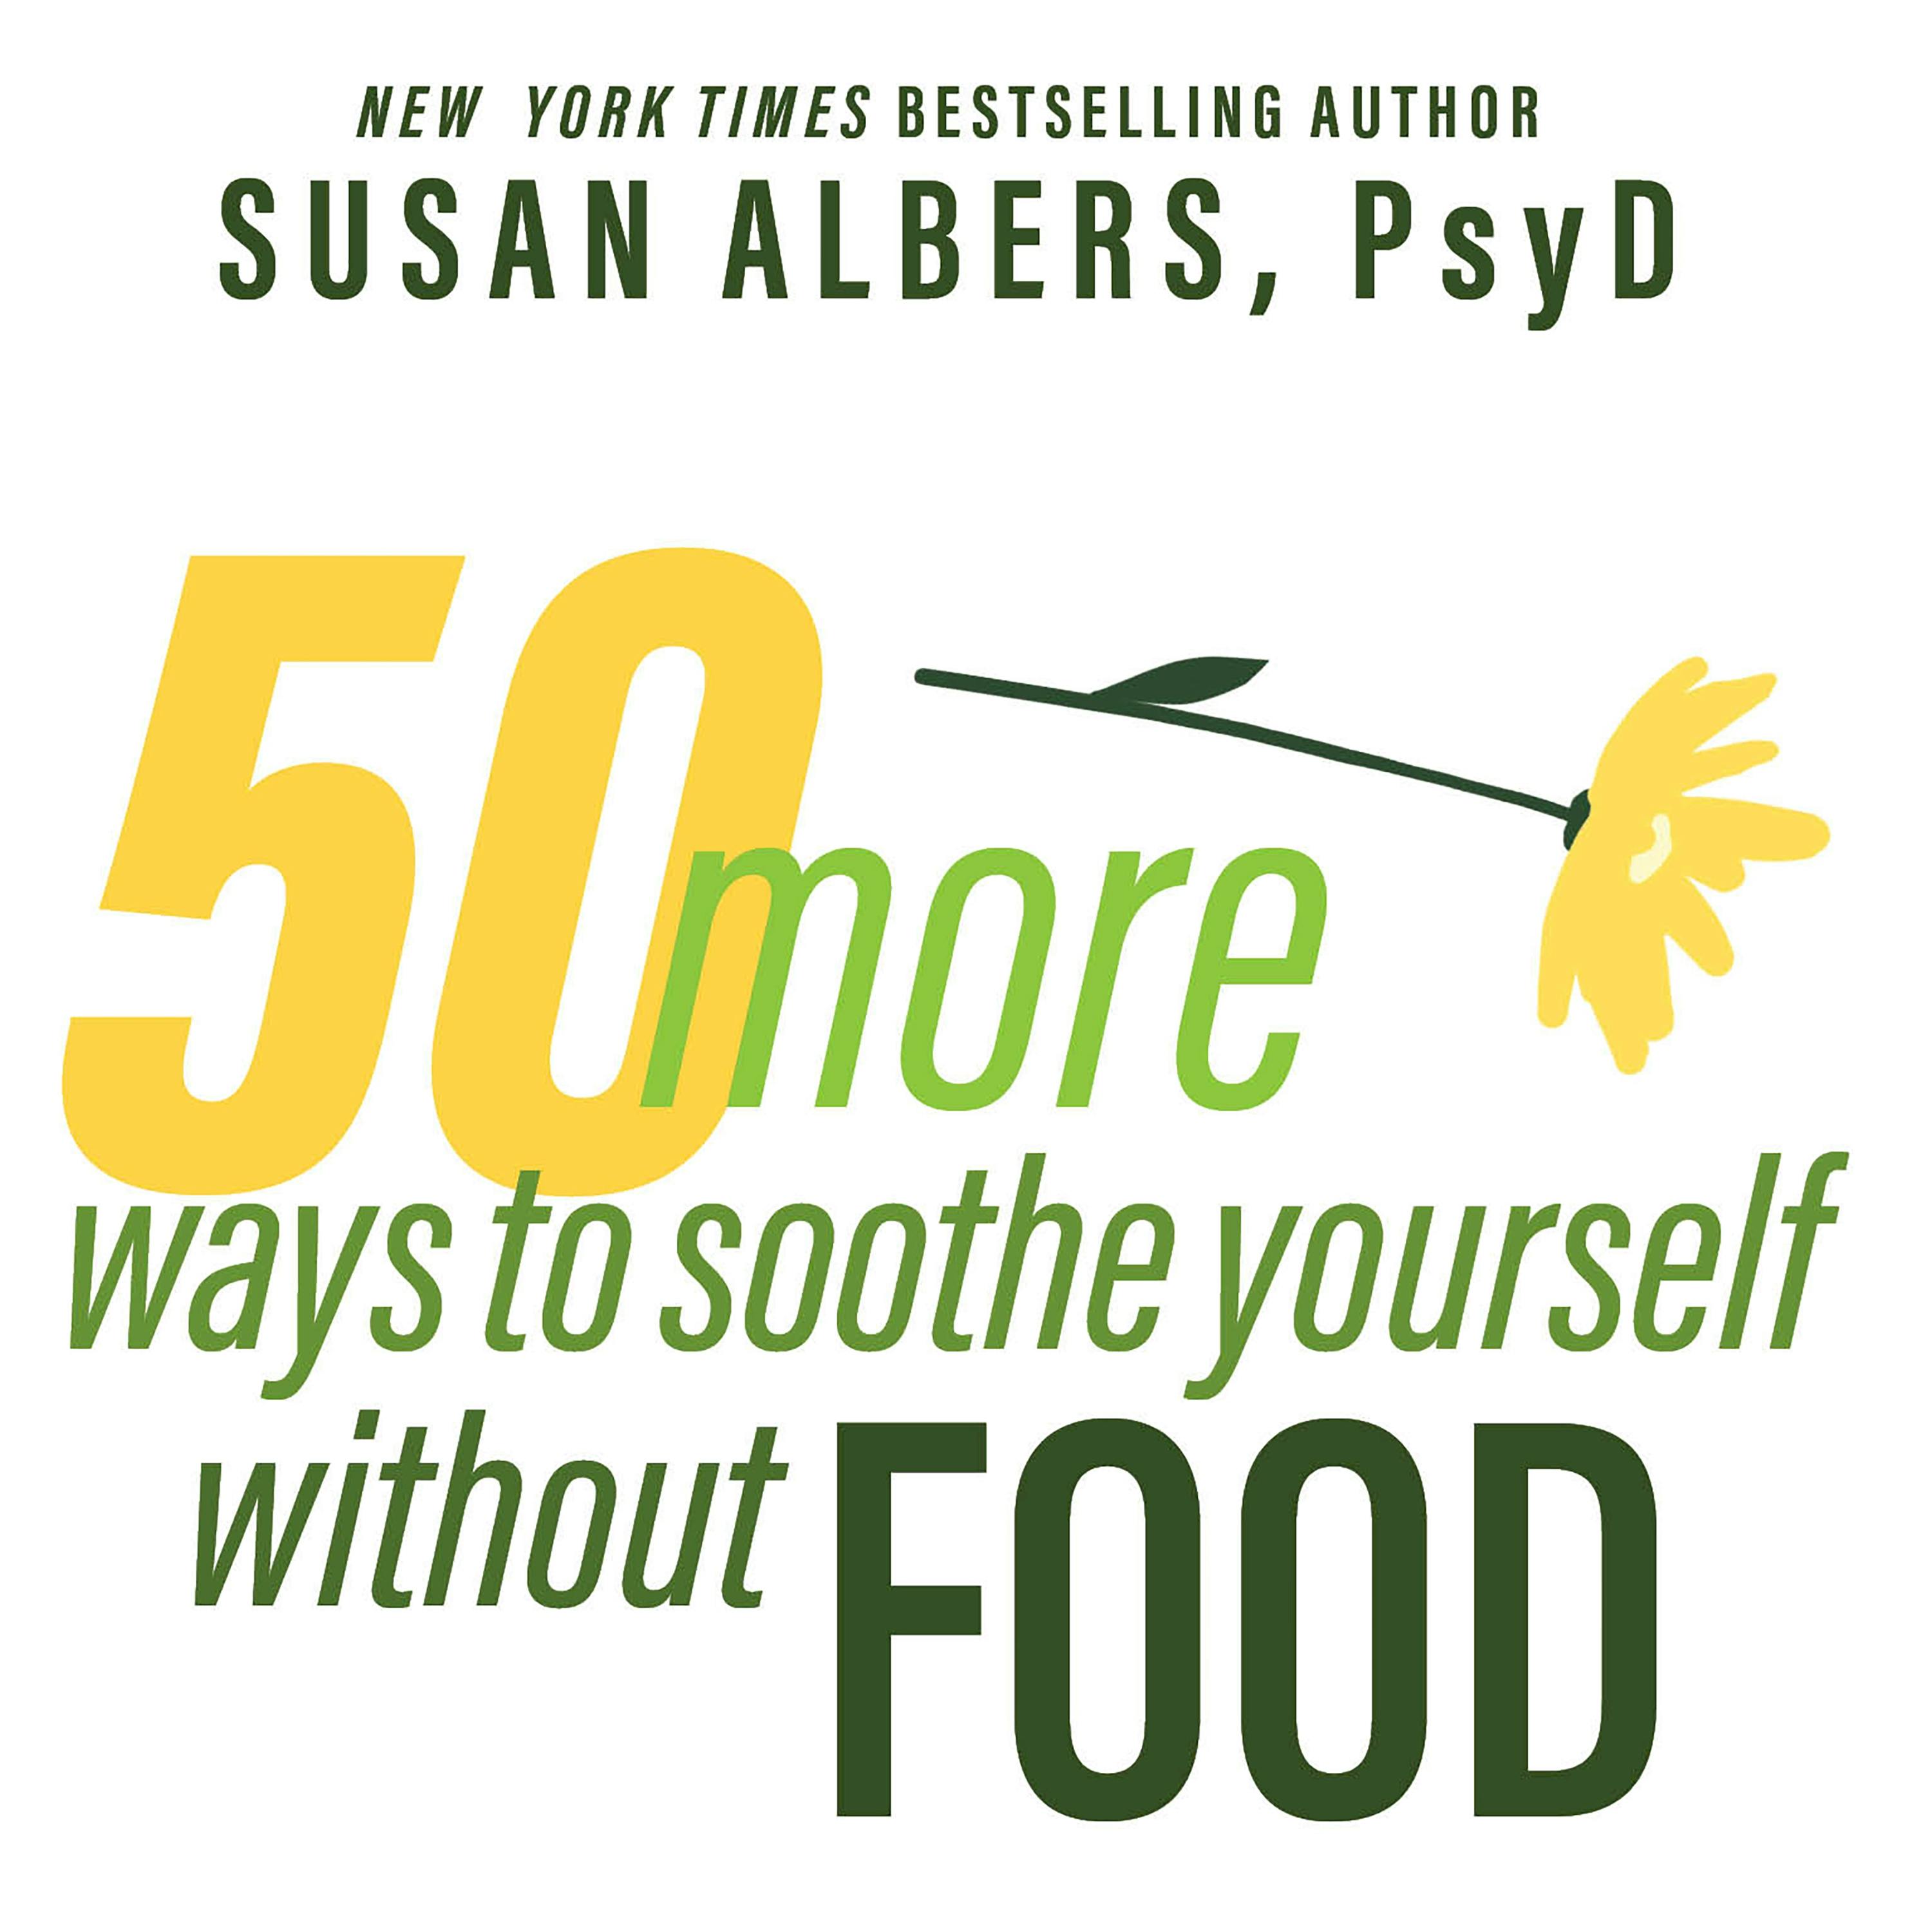 50 More Ways to Soothe Yourself Without Food: Mindfulness Strategies to Cope With Stress and End Emotional Eating - undefined